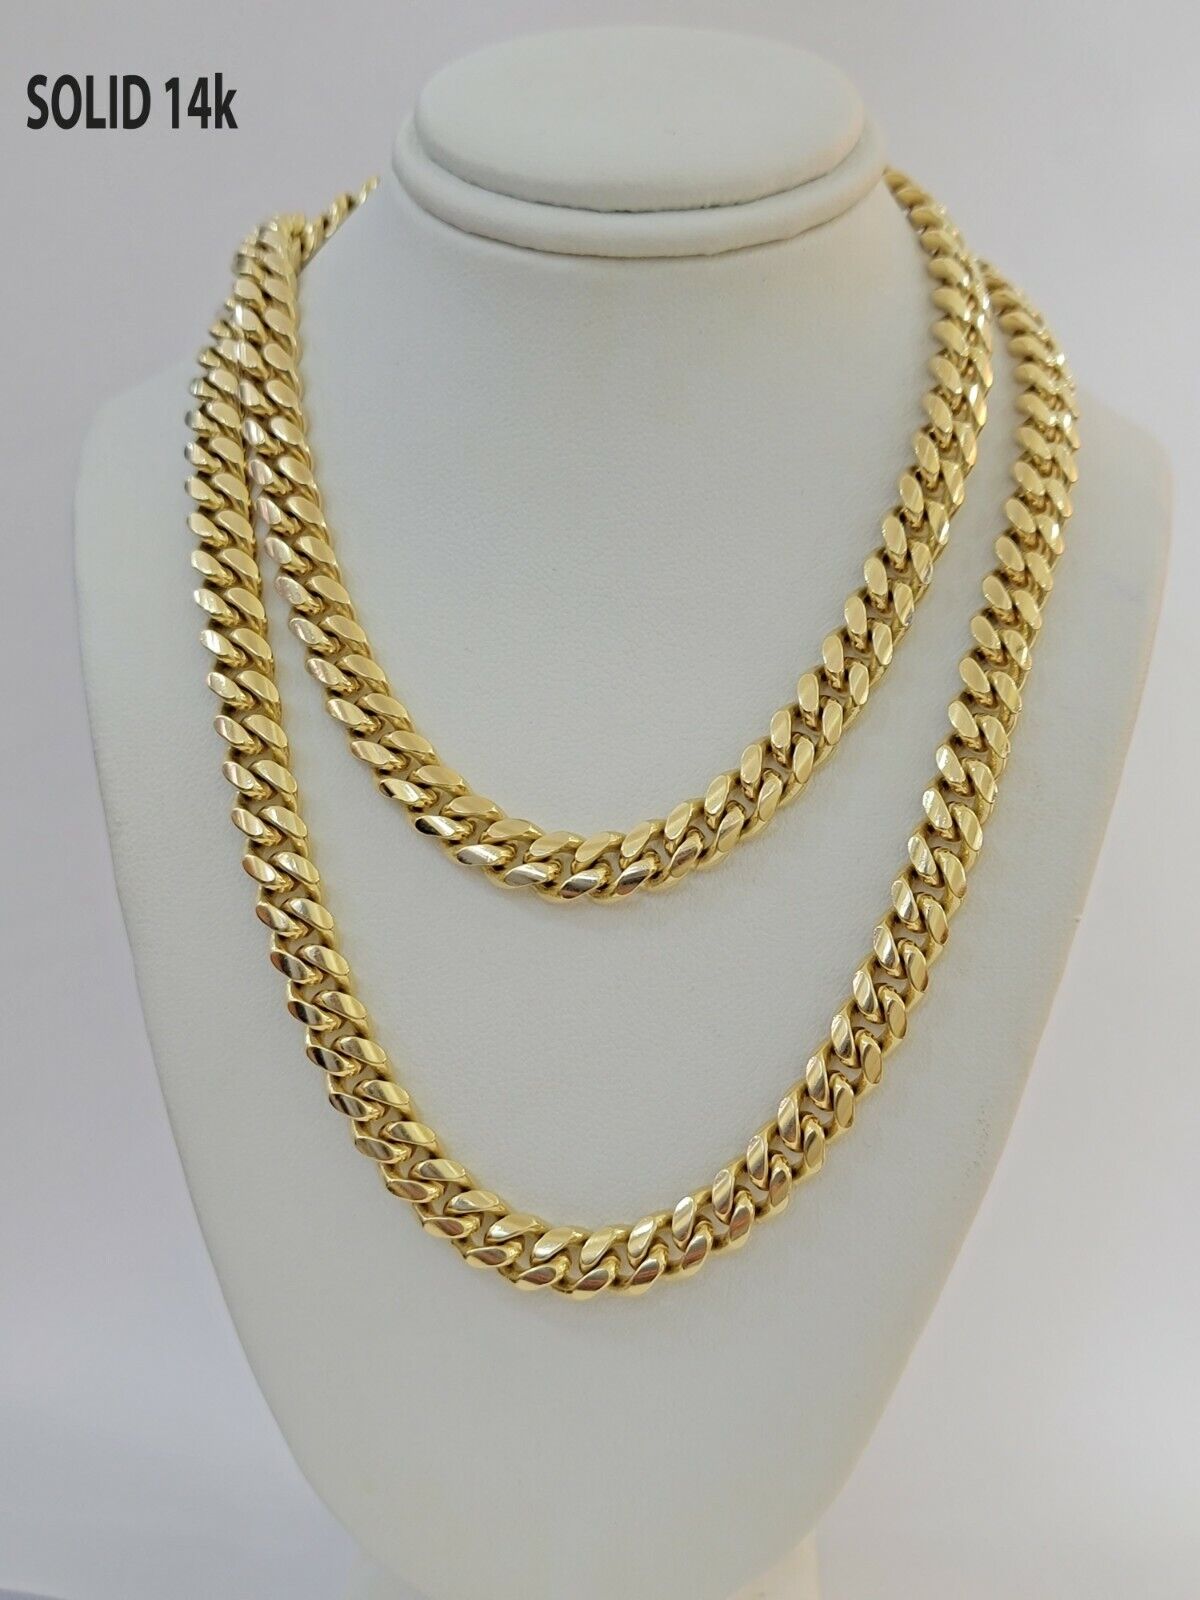 Real 14k Yellow Gold Chain Miami Cuban Link Necklace Mens Solid 8mm 22 Inch 14KT